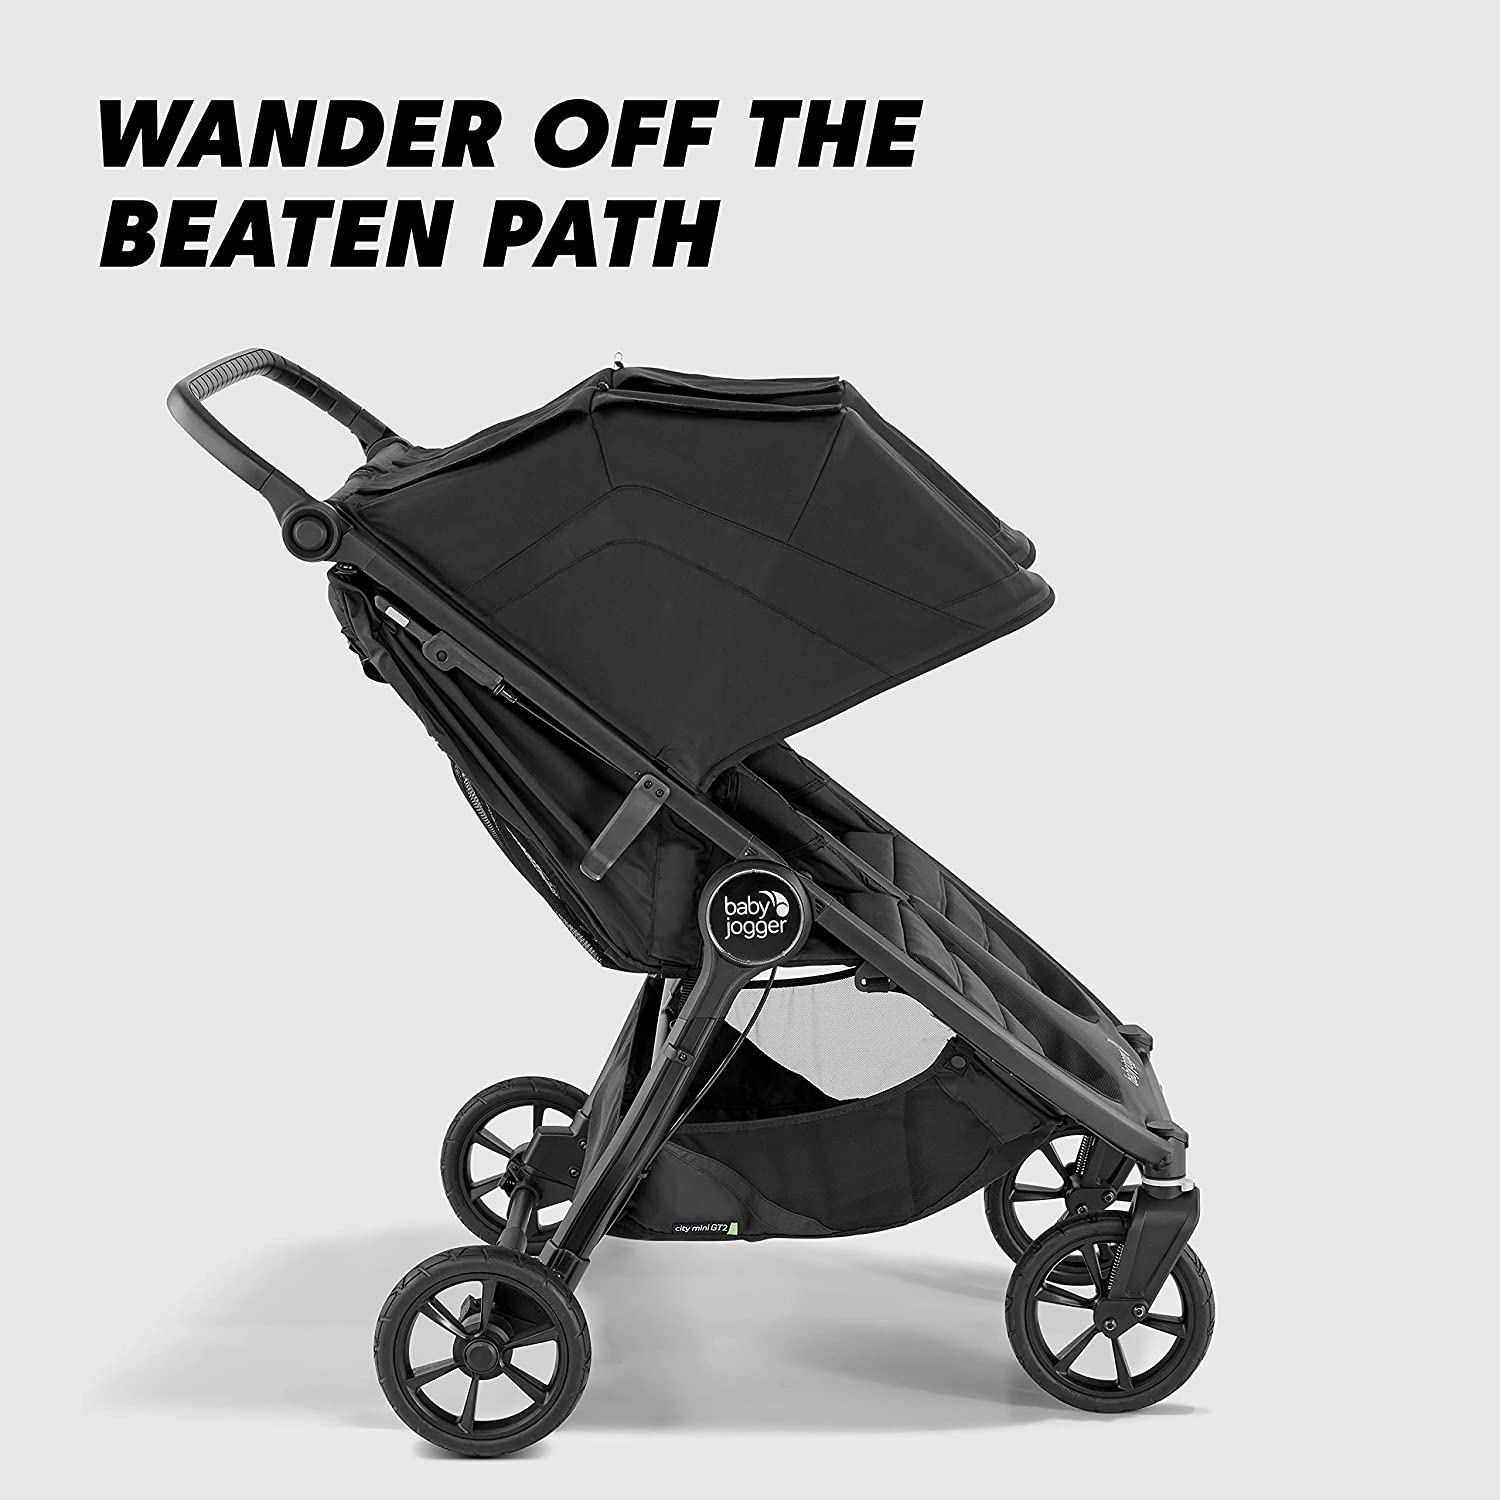 BABY JOGGER City Mini GT 2 Double Stroller - ANB Baby -$500 - $1000